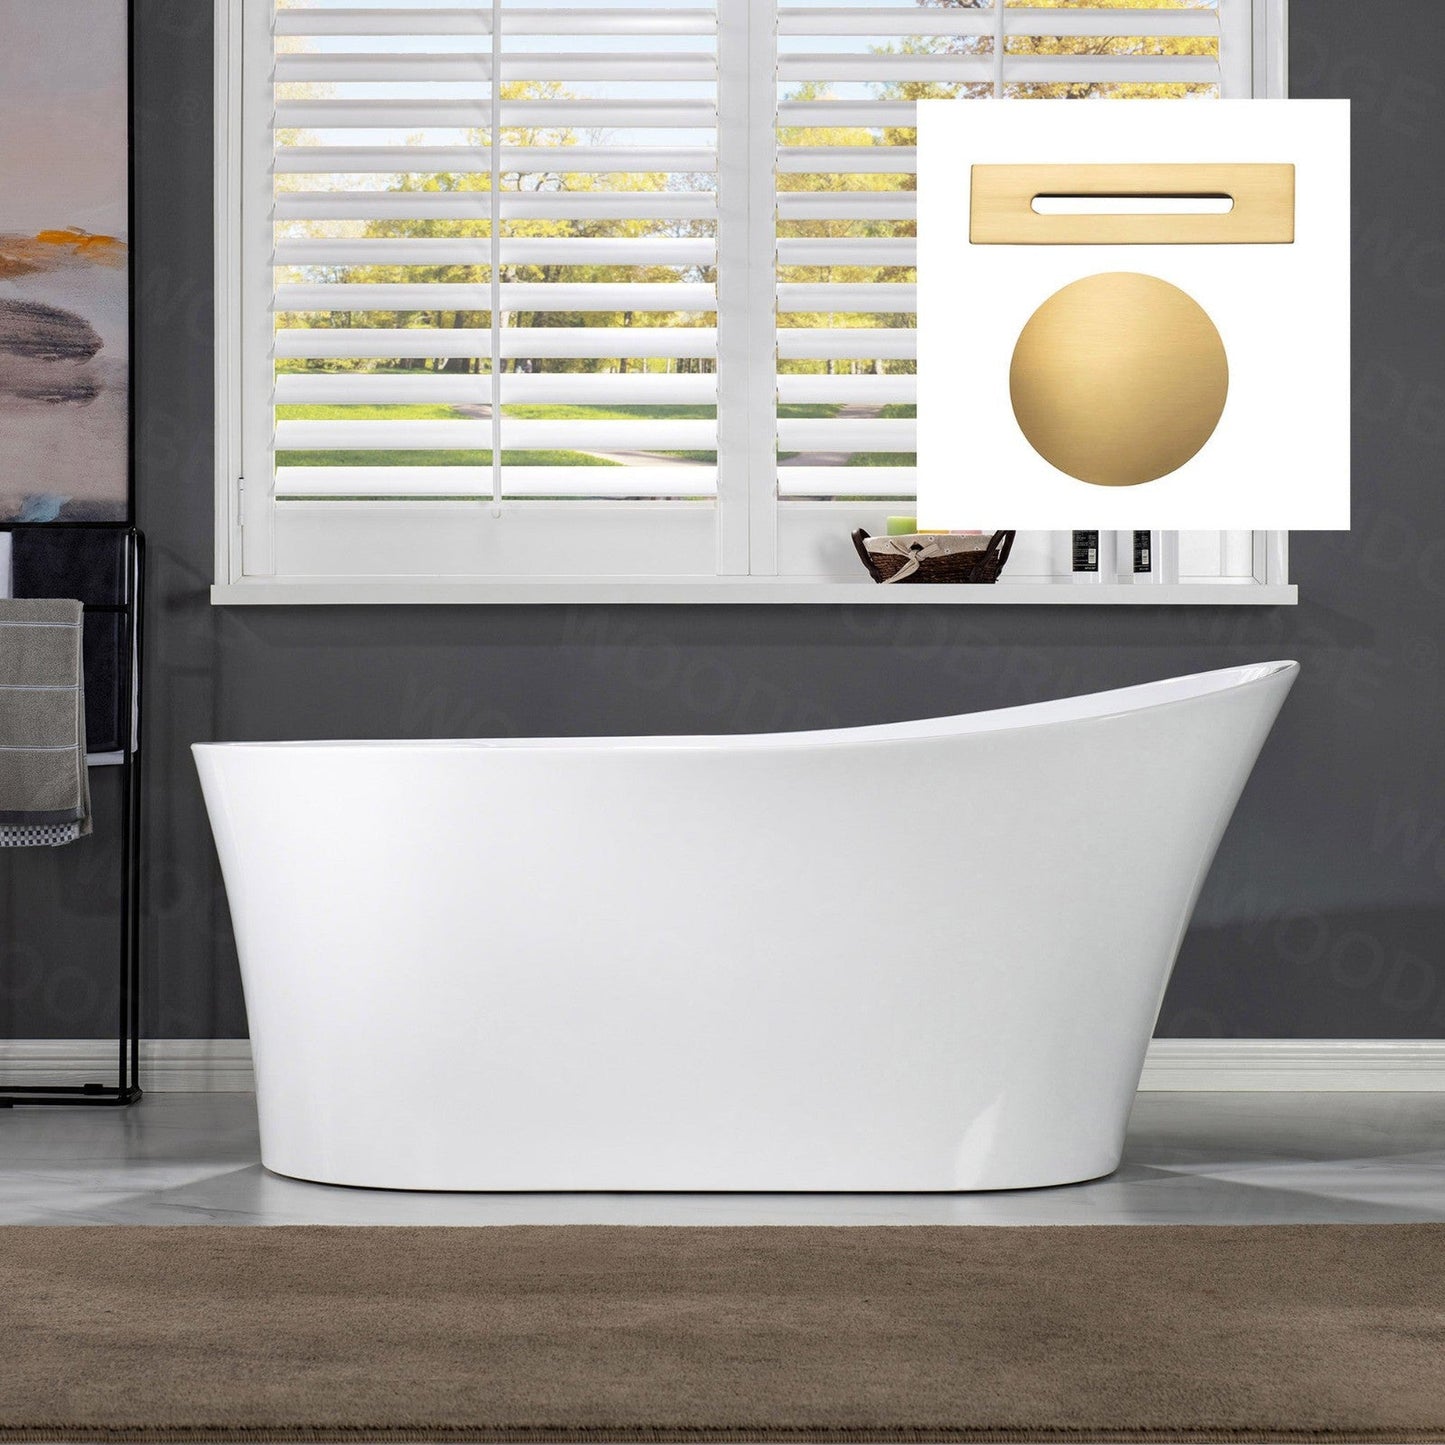 WoodBridge B0084 67" White Acrylic Freestanding Soaking Bathtub With Brushed Gold Drain, Overflow, F0073BGVT Tub Filler and Caddy Tray